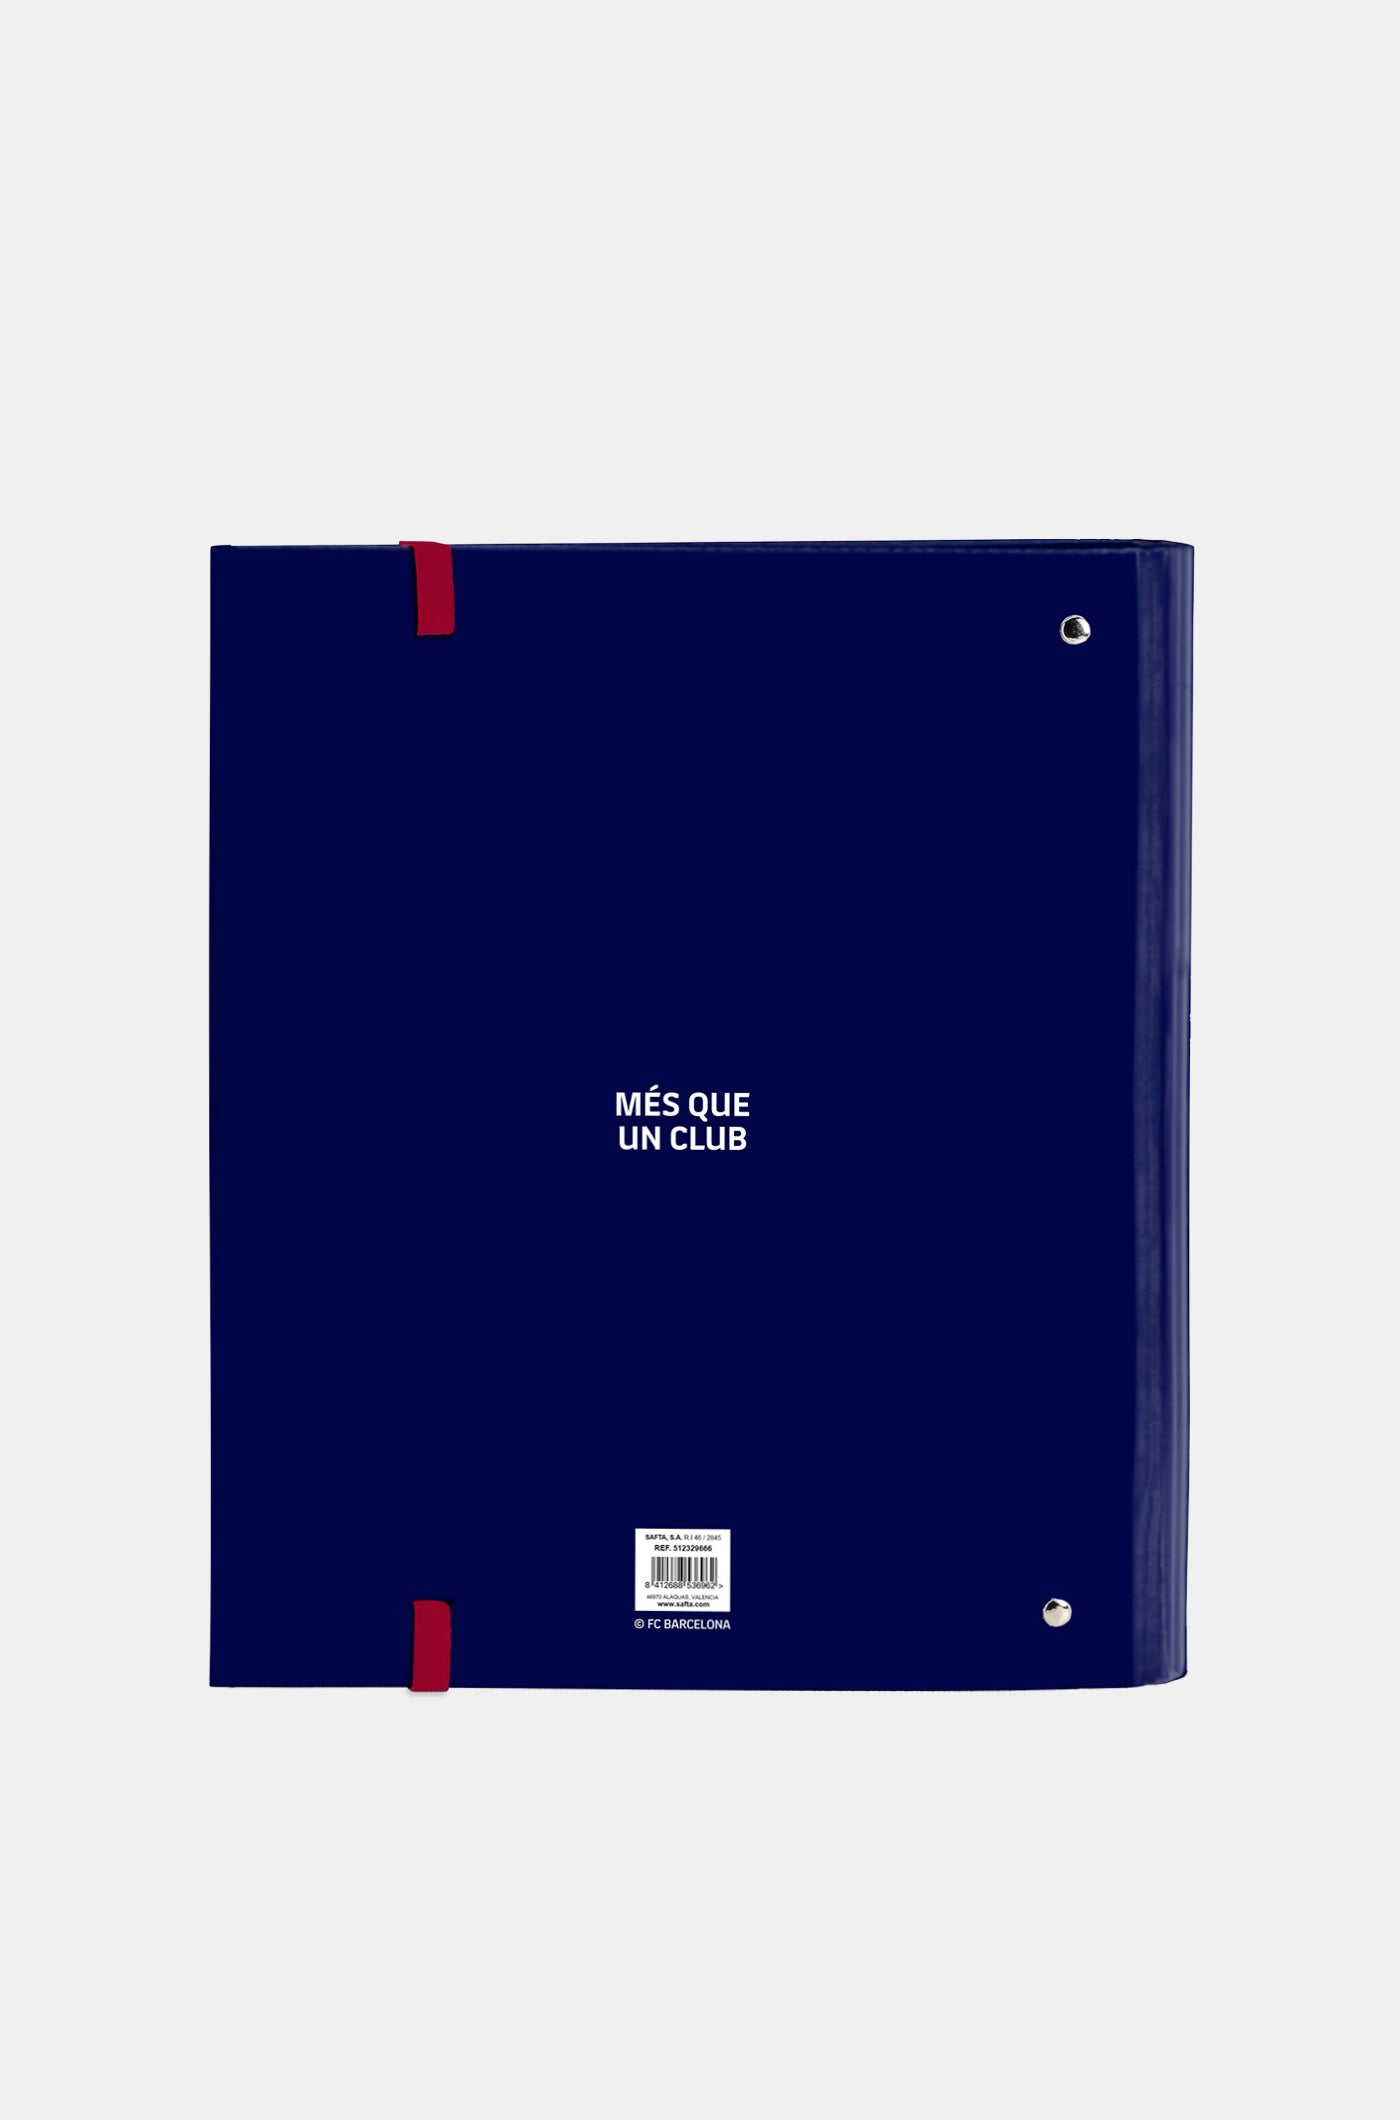 Ring binder with replacement FC Barcelona 23/24